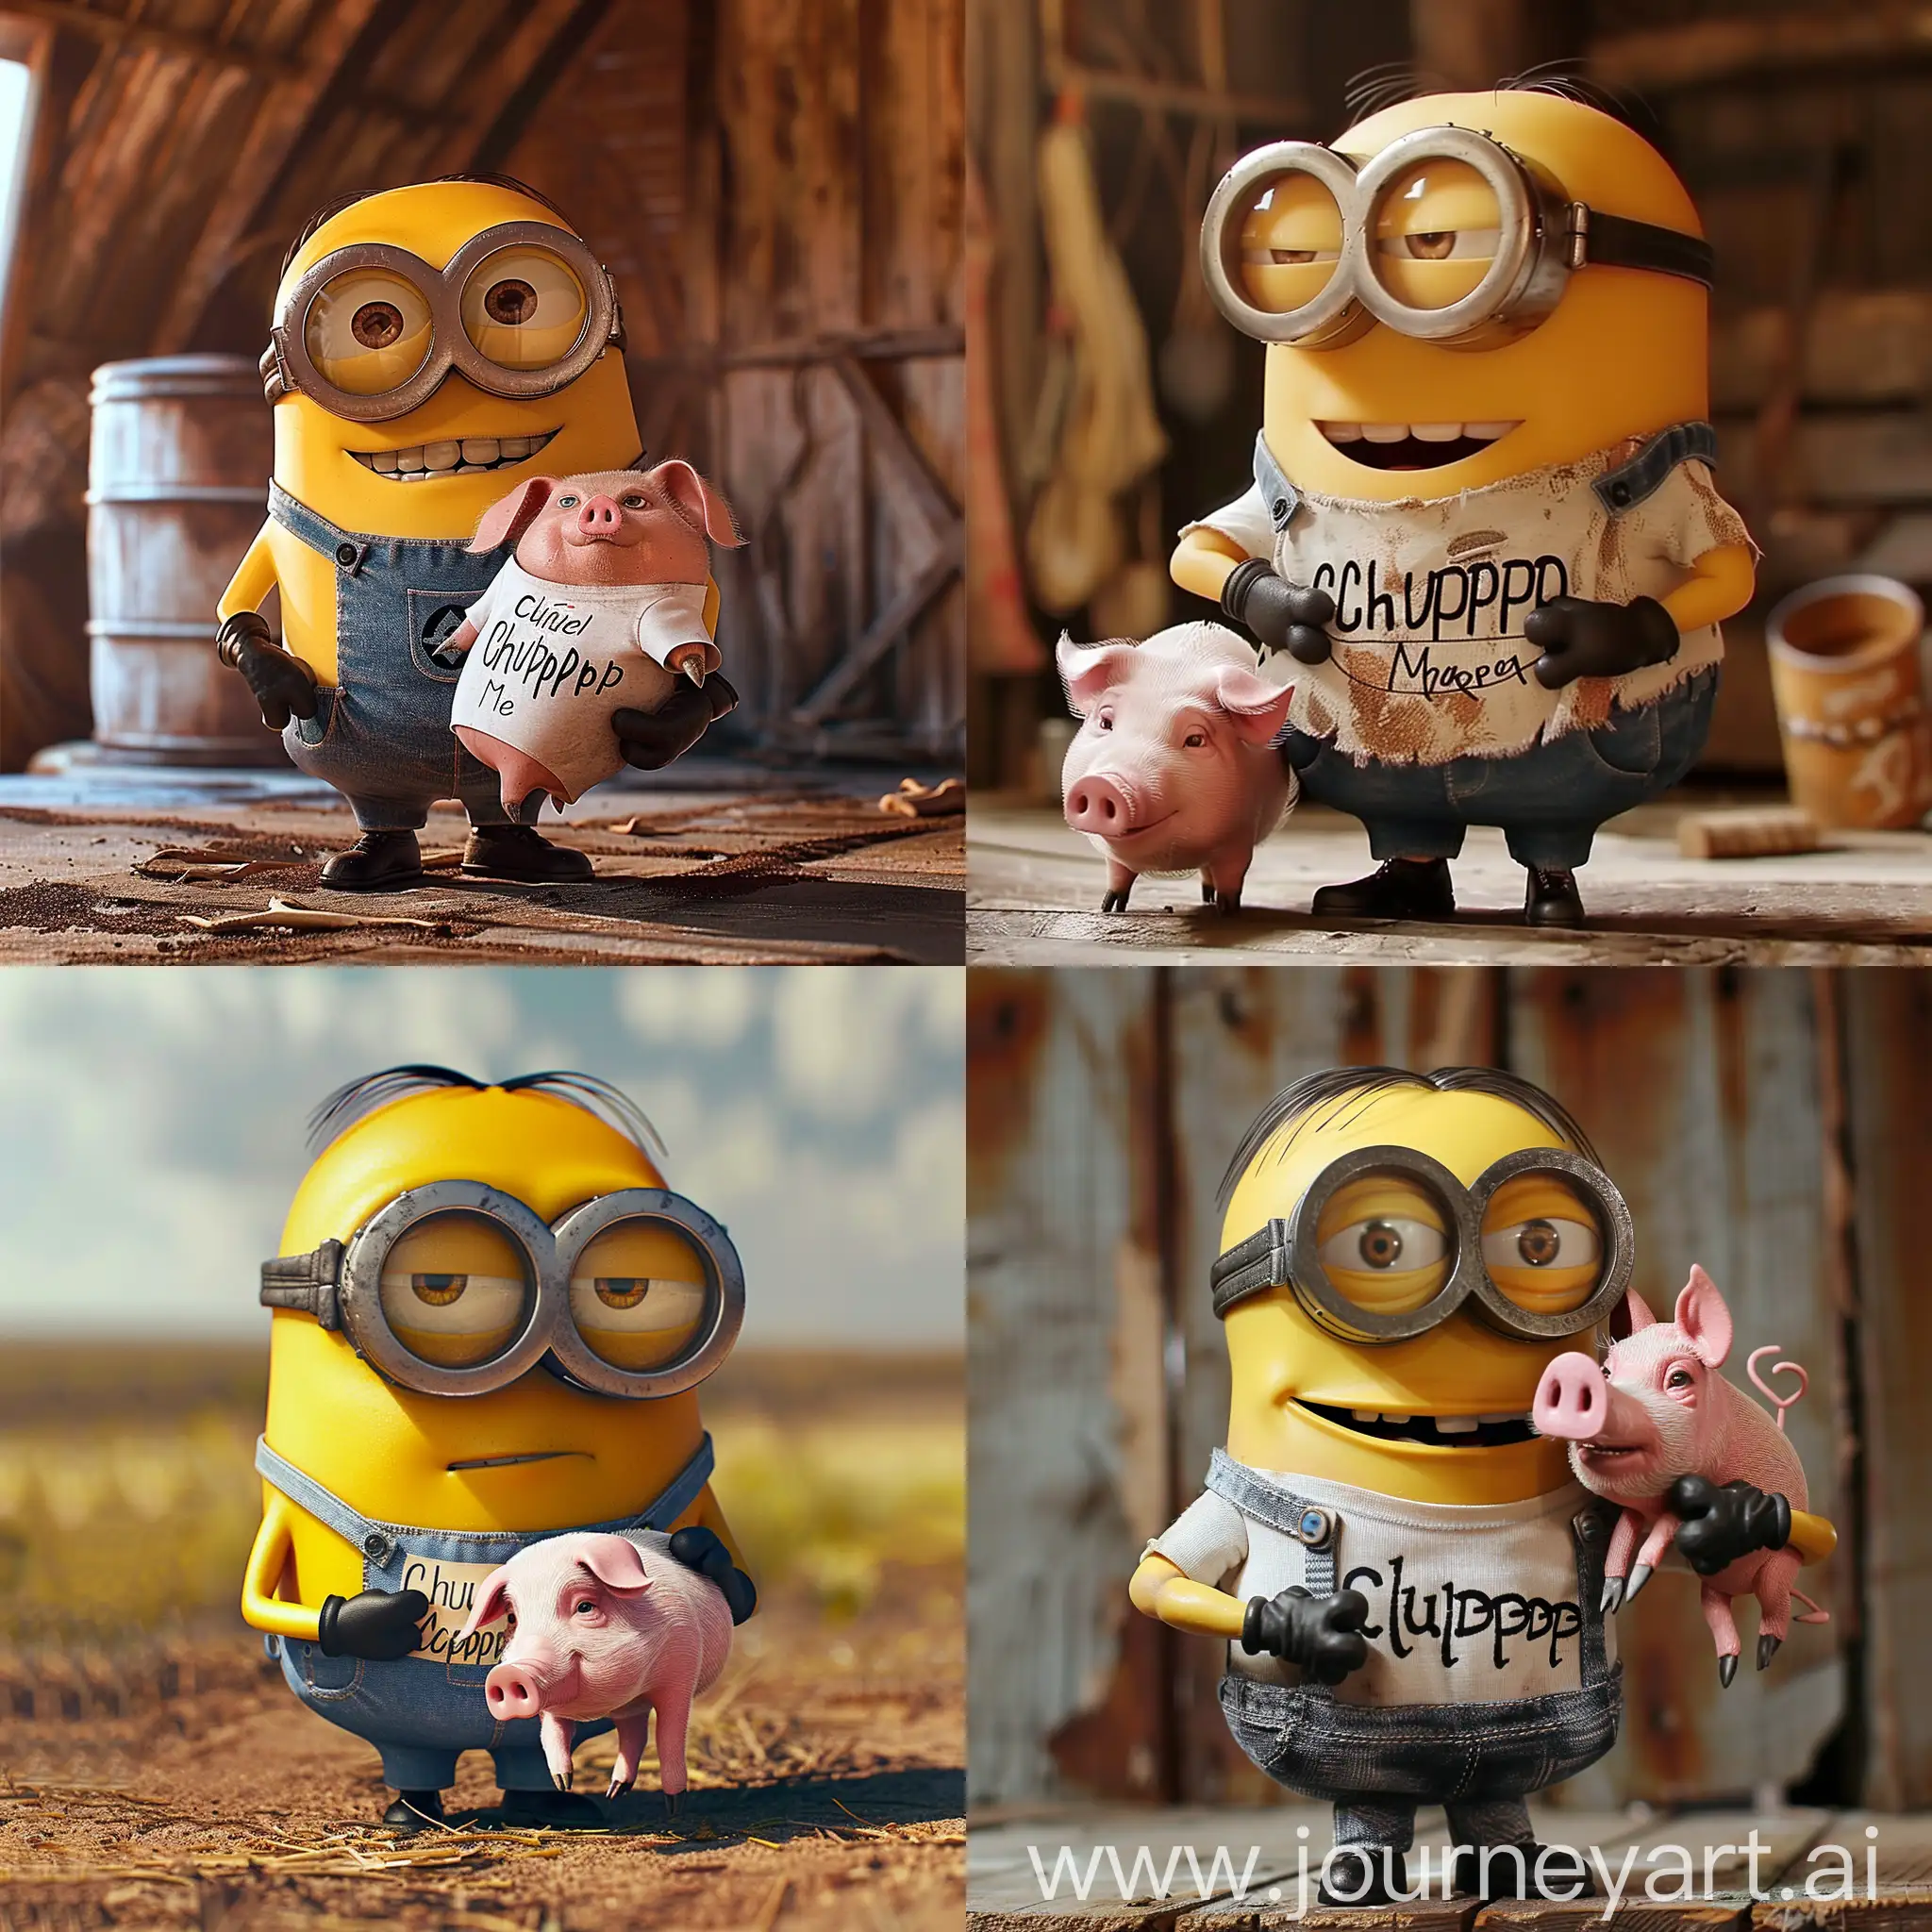 Strong-Minion-from-Despicable-Me-Holding-chupep-Pig